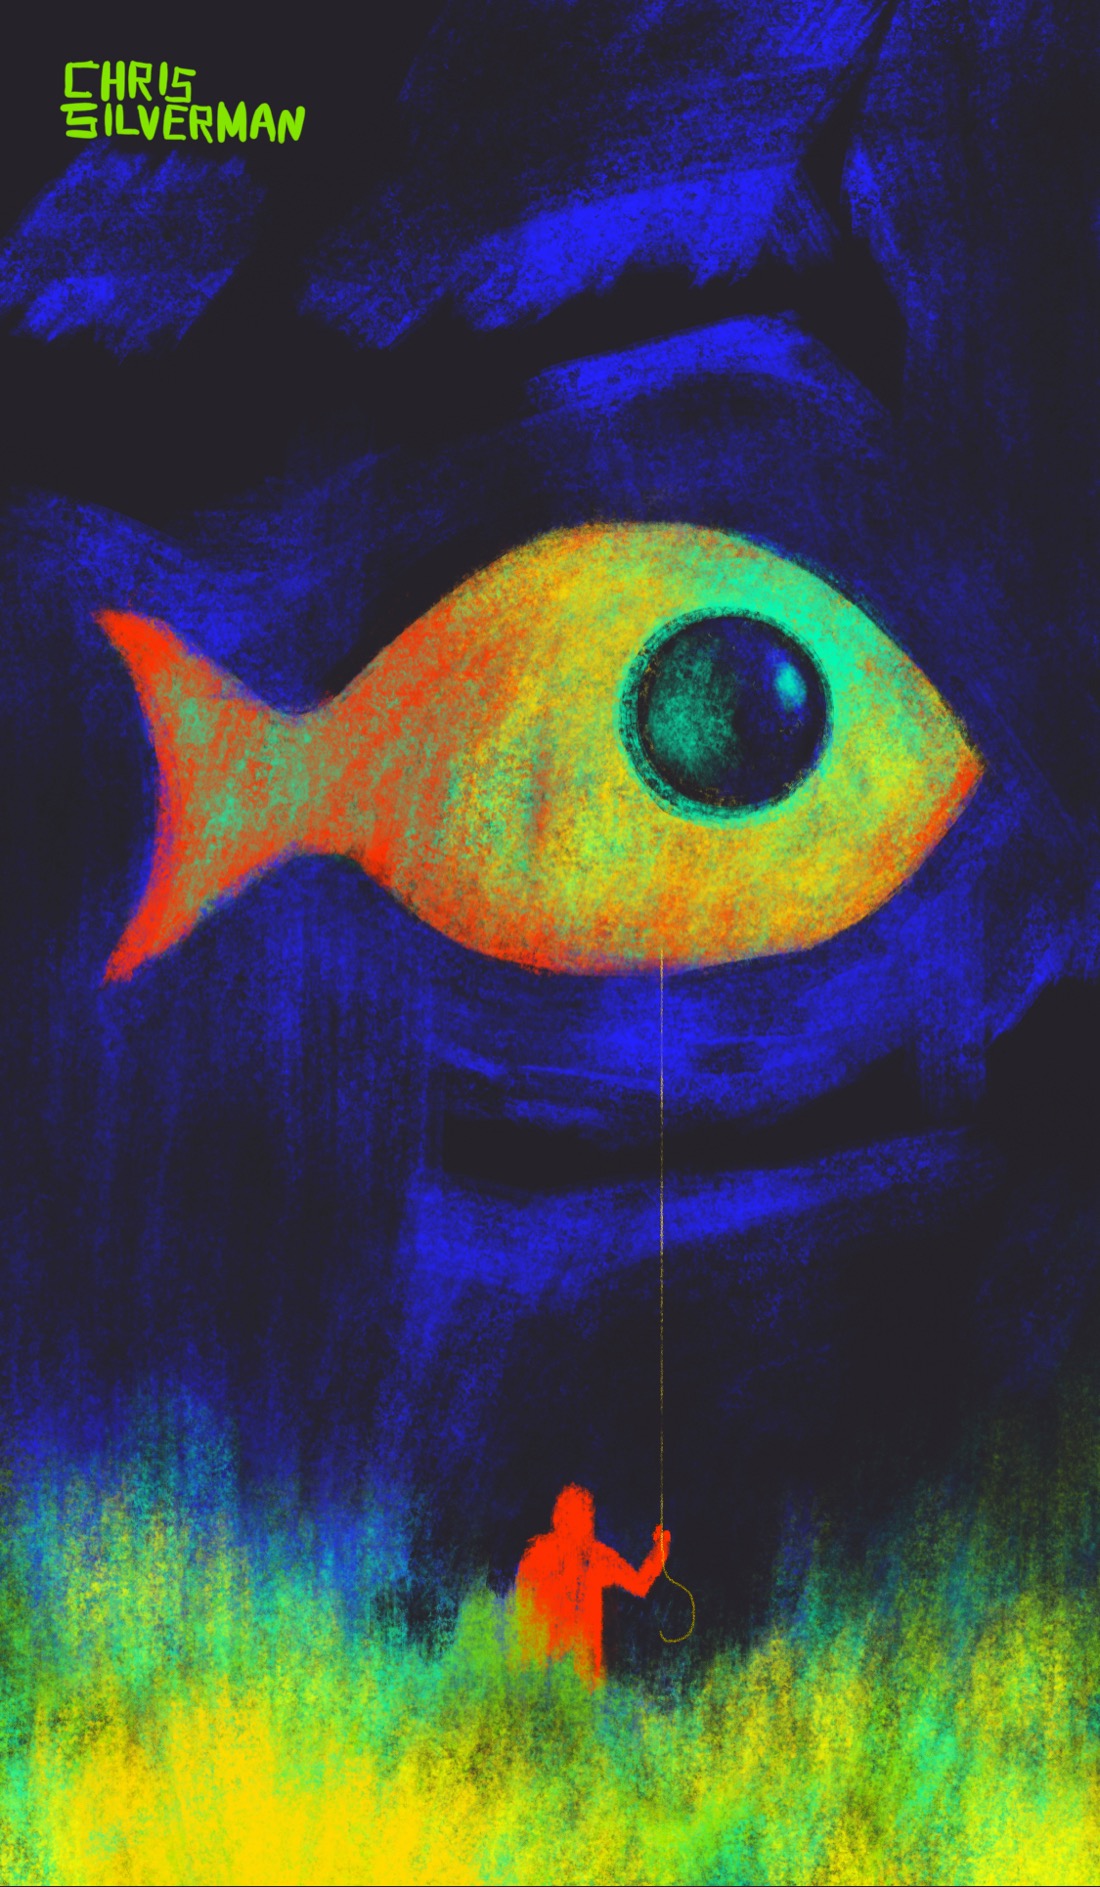 A very simple fish—imagine a goldfish cracker—floats in a black space. The black space is accented by irregular blue shapes that look almost like fragments of something. The fish is multiple colors: orange, gold, and iridescent green, mixed together. It has a large, round eye that resembles a spherical window. A long, thin string extends below it, as though it's a balloon. The string is held by a small red-orange figure standing among green and yellow grasses.